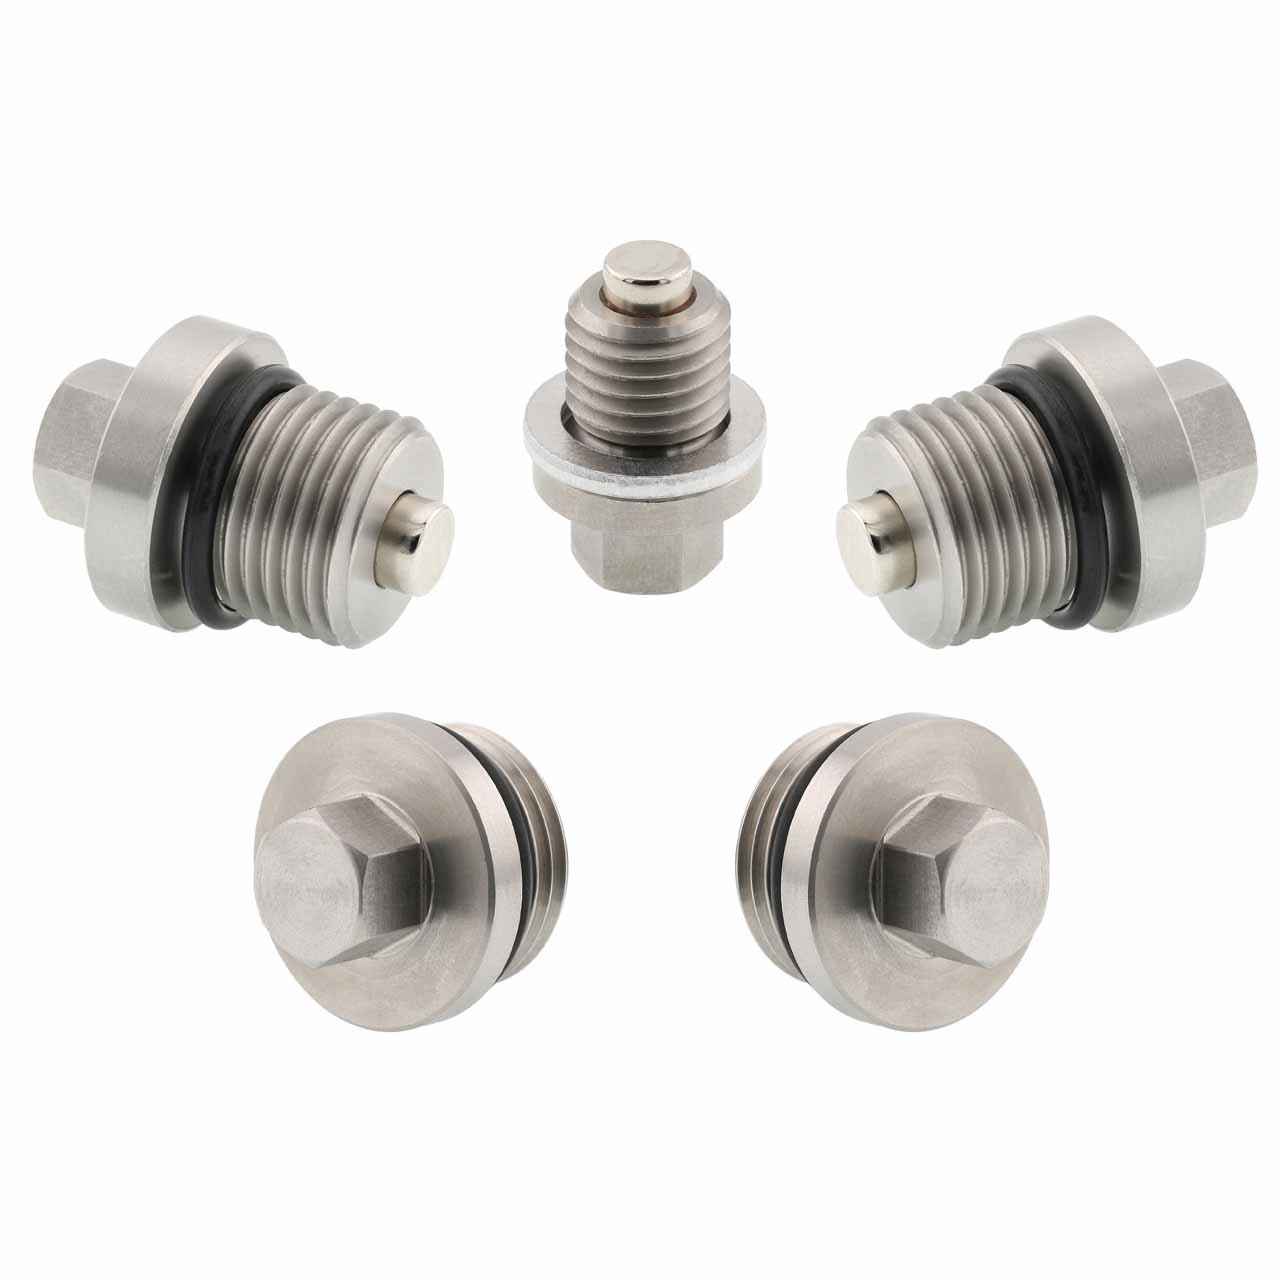 Polaris RZR XP 4 Turbo Magnetic Oil Drain Plug Kit - 2019-2021 - Engine, Transmission, Differential - Made In USA